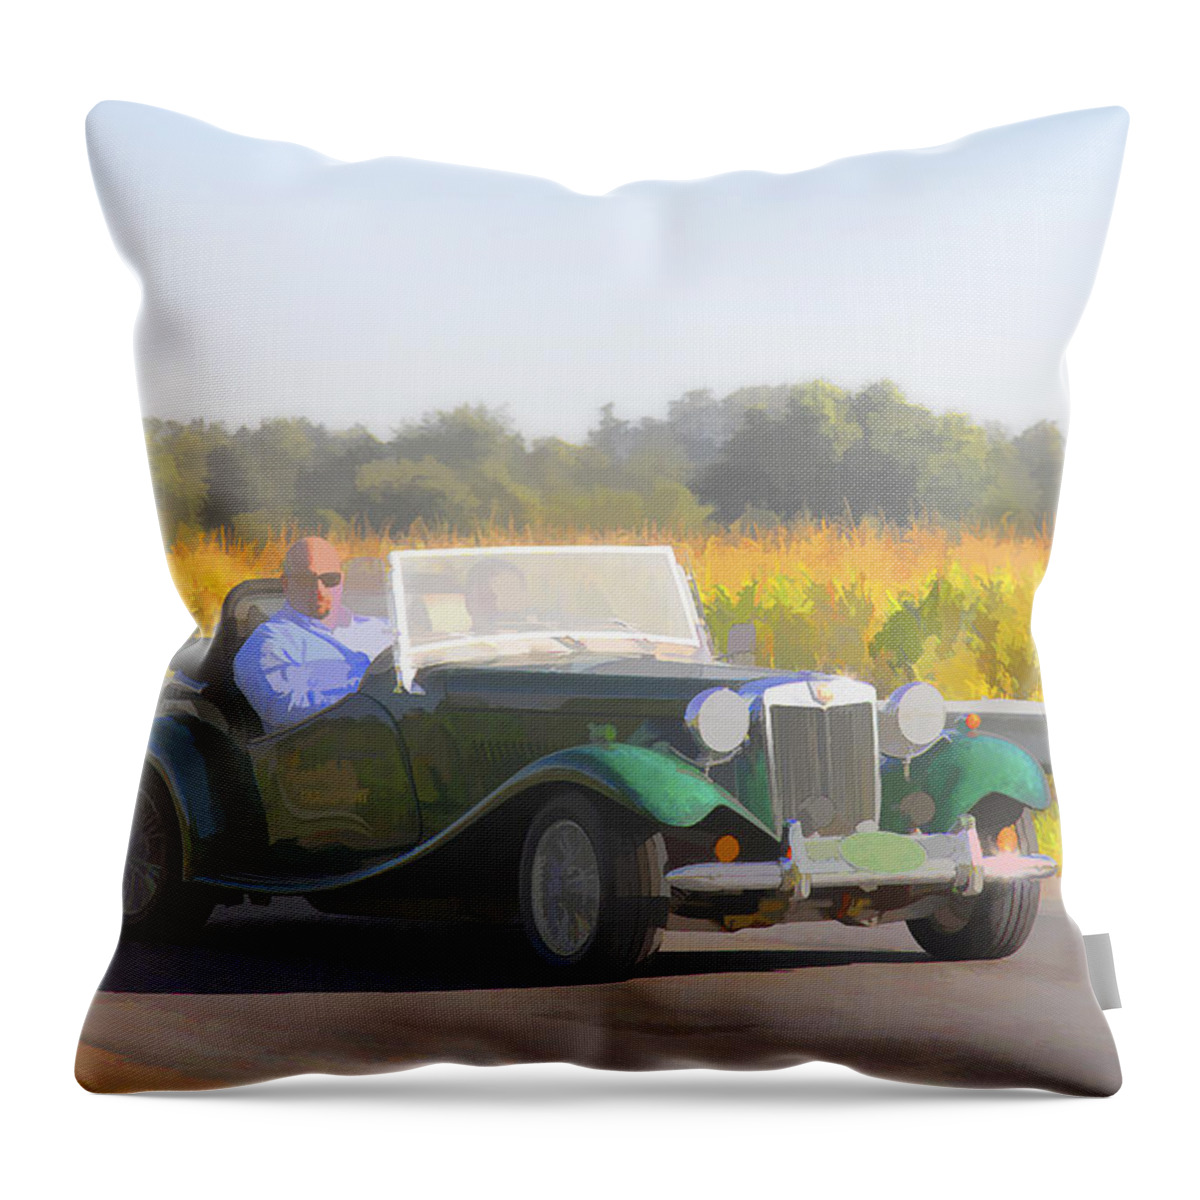 Mg Throw Pillow featuring the photograph 1953 Mg Td by Jack R Perry